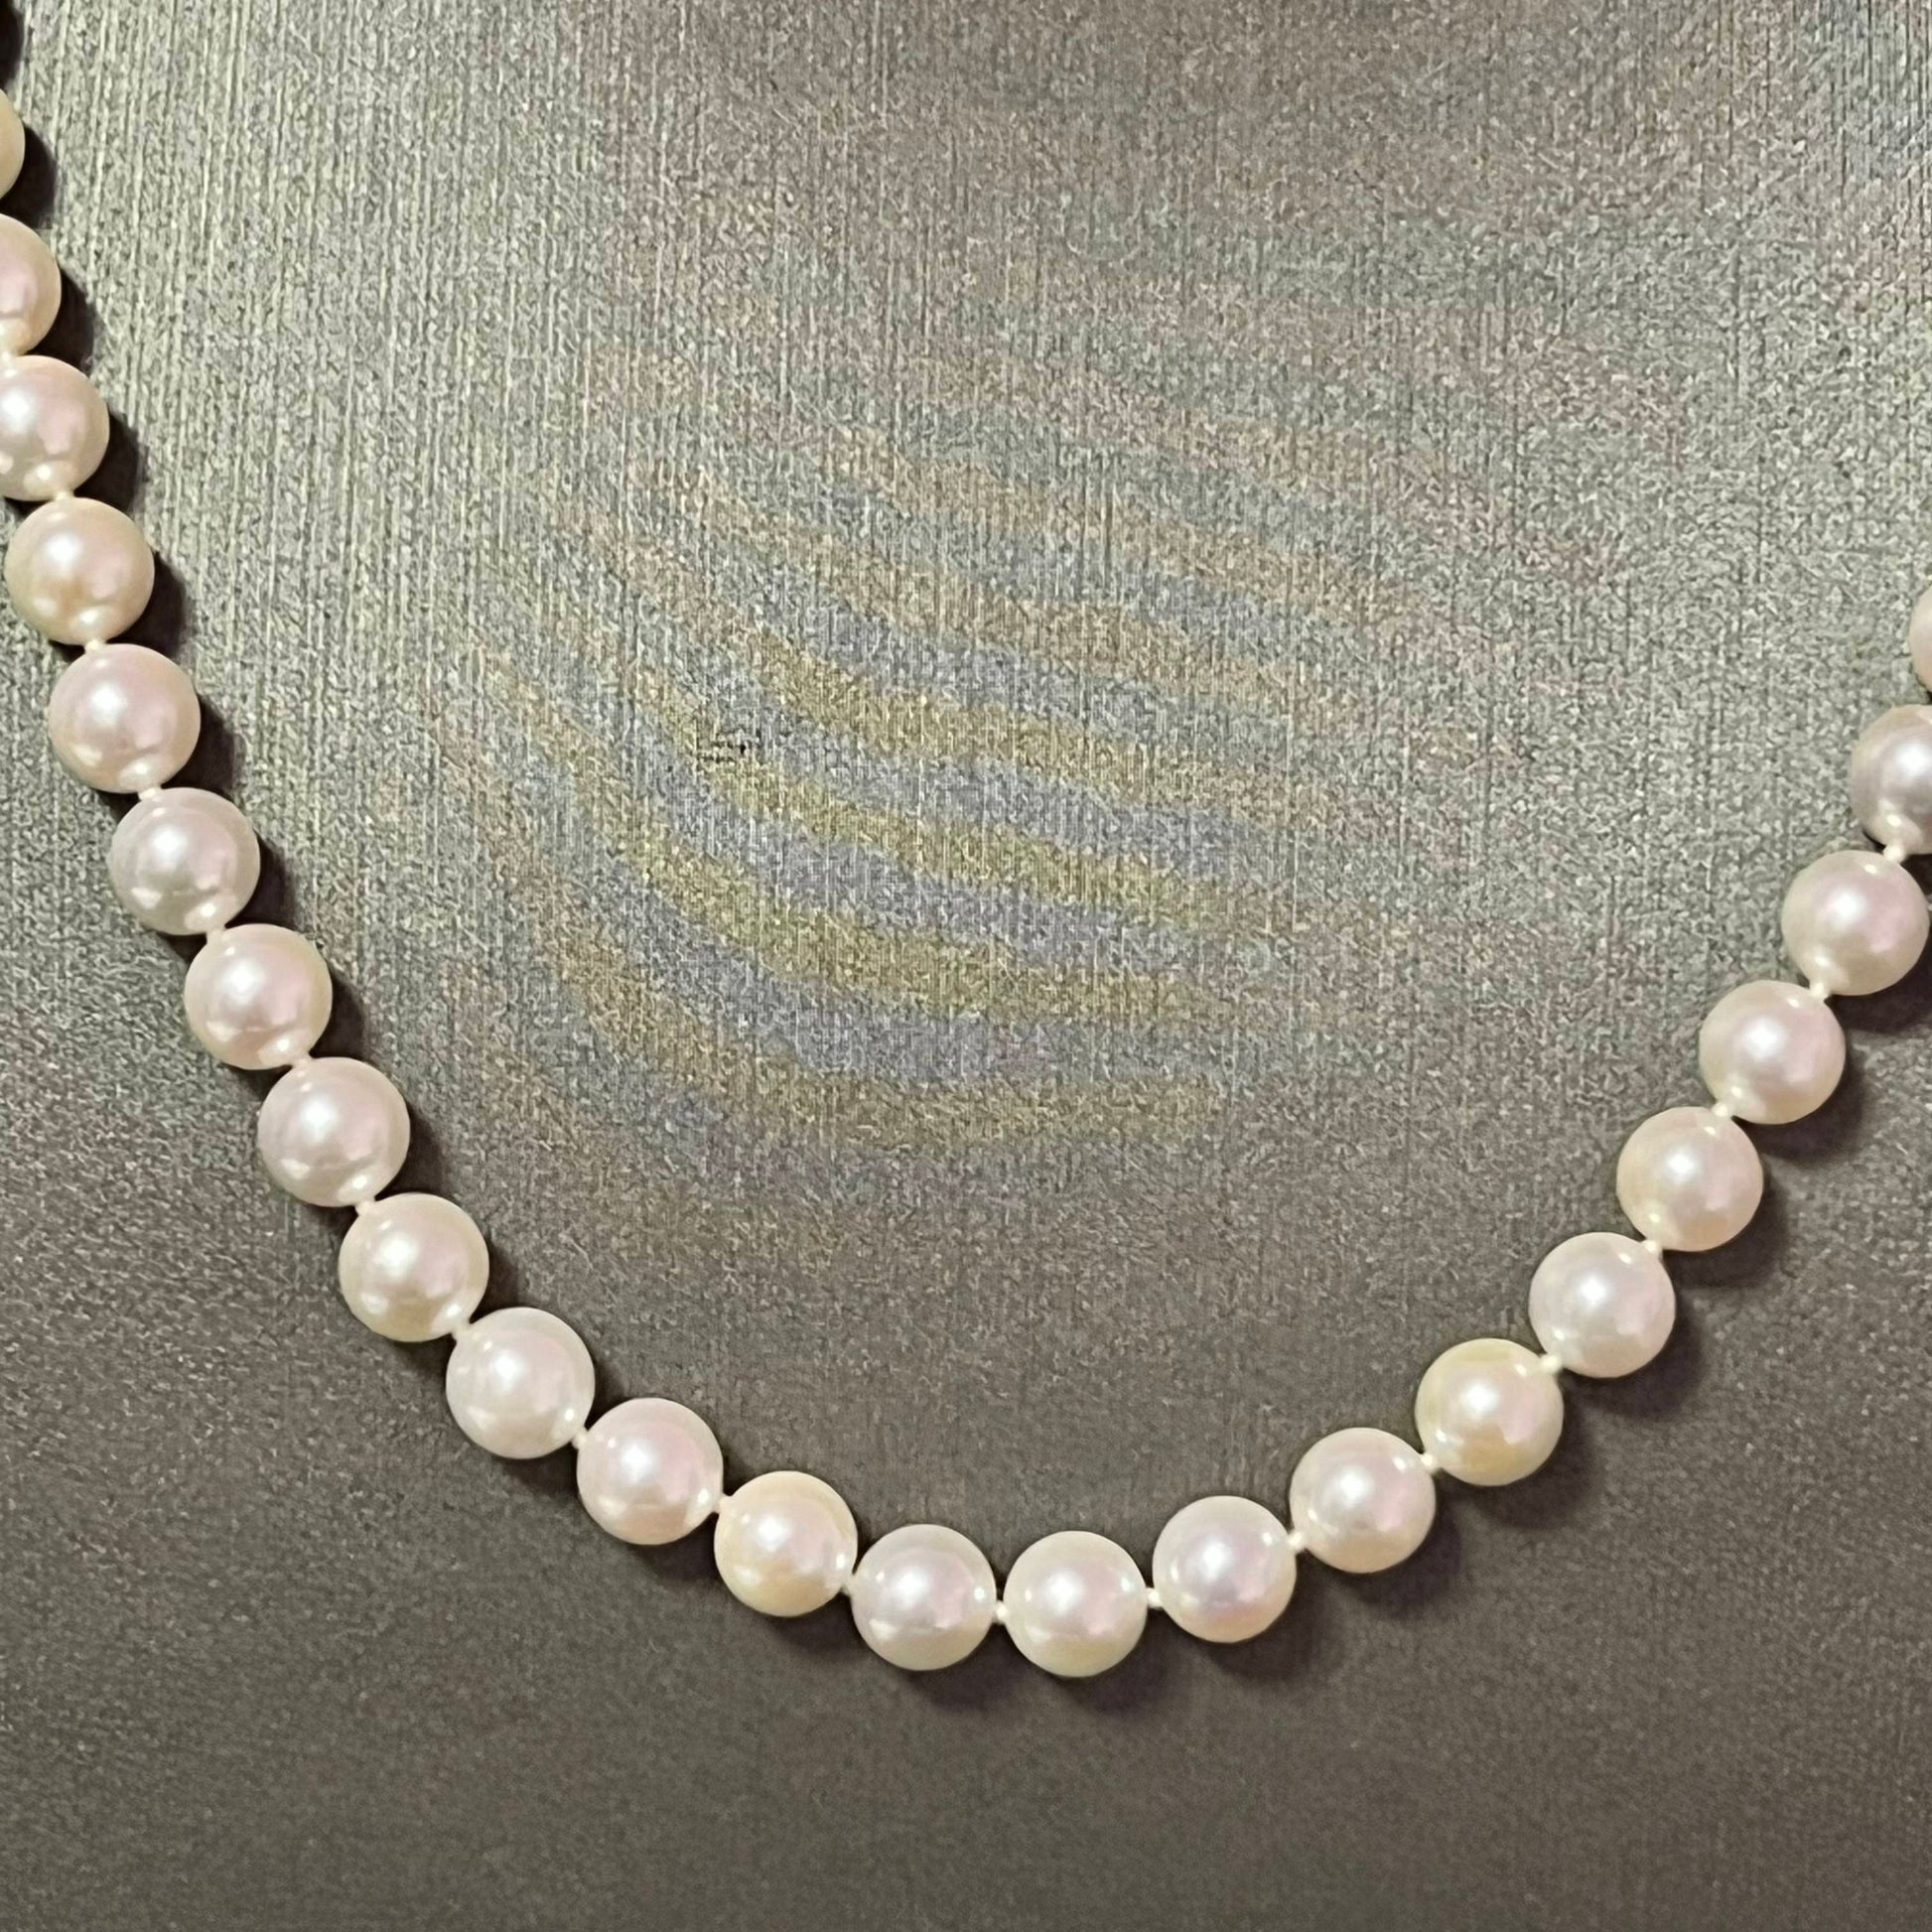 Akoya Pearl Necklace 14k Yellow Gold 18" 7 mm Certified $2,950 210638 - Certified Estate Jewelry